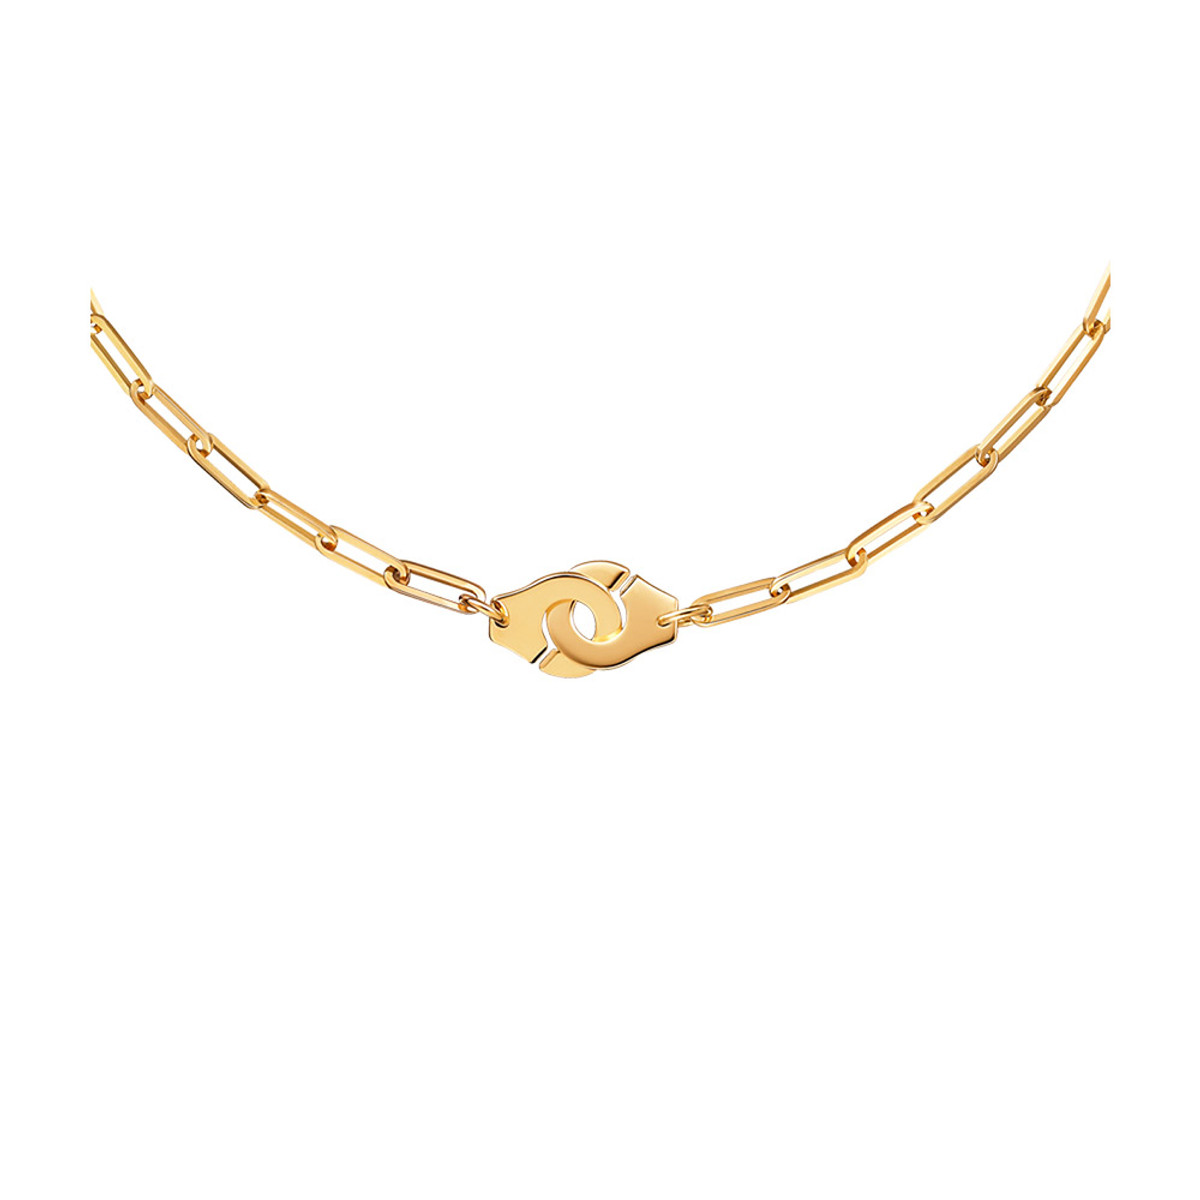 Dinh Van 18K Yellow Gold Menottes R12 Necklace-47529 Product Image